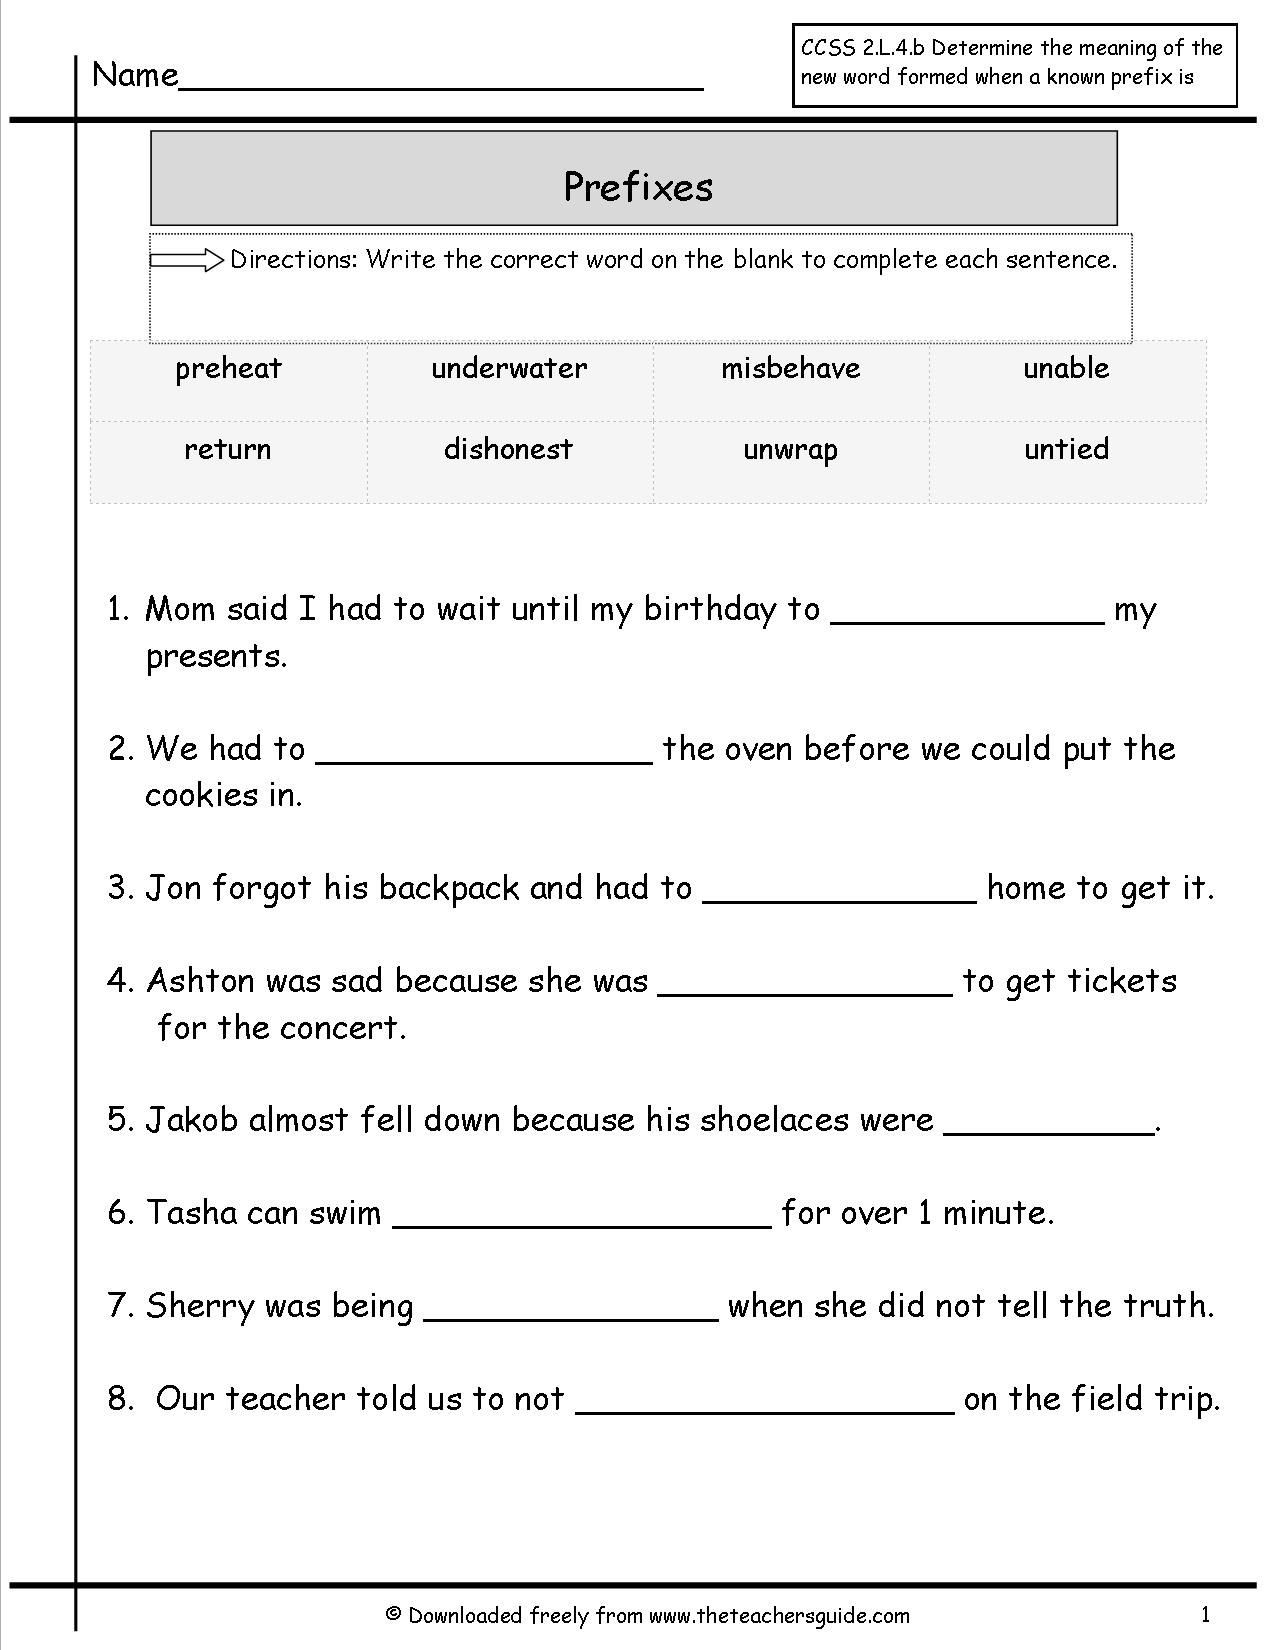 Prefixes Worksheets 4th Grade Prefixes and Suffixes Worksheets Look at This One Next Week